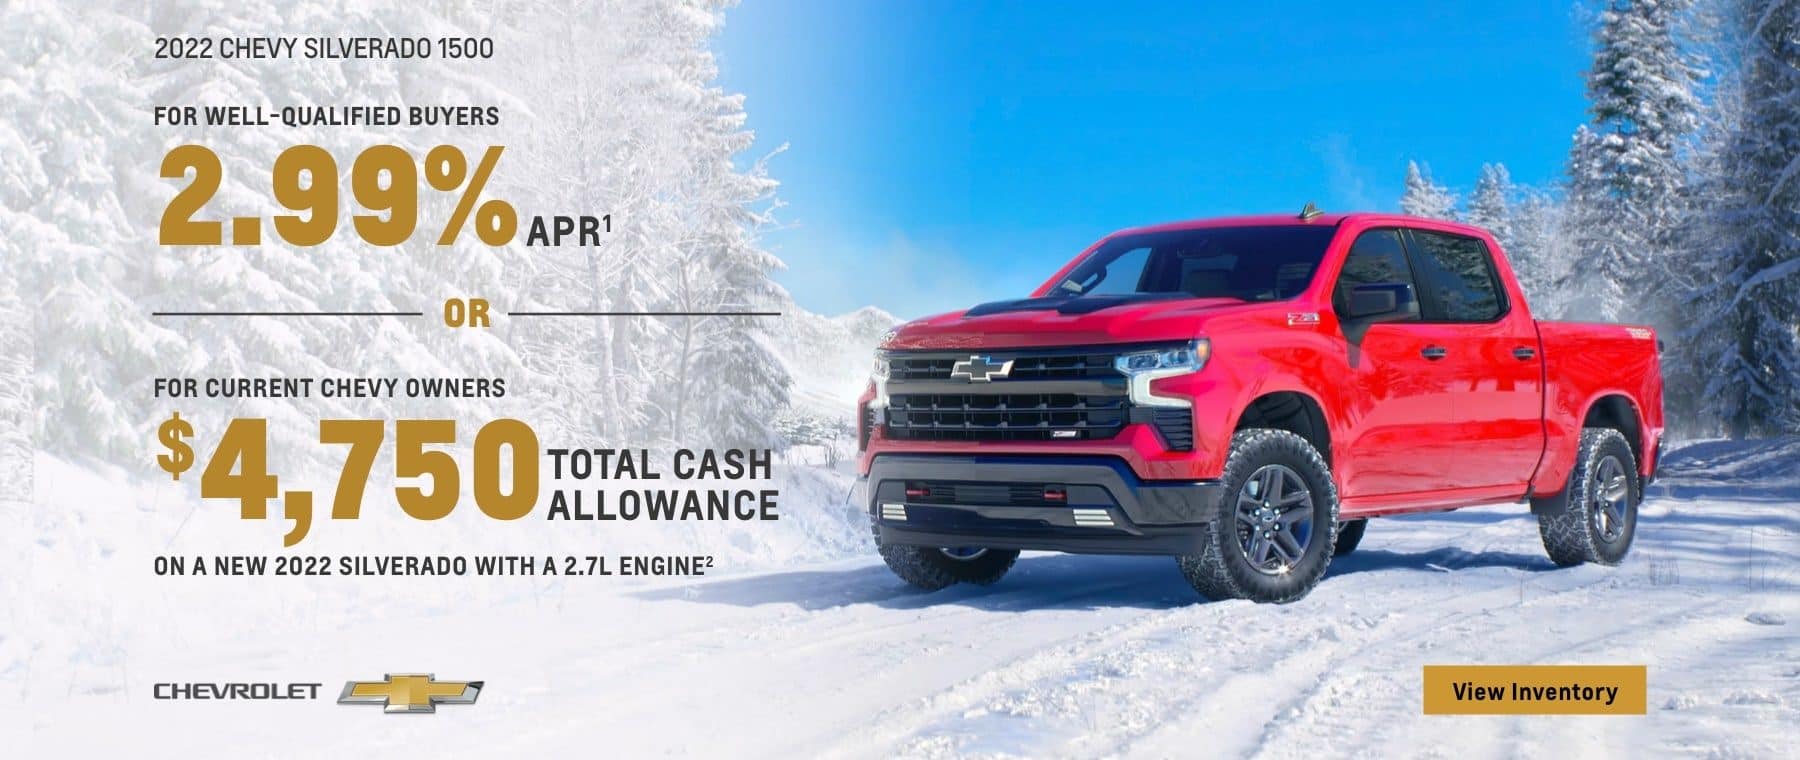 2022 Chevy Silverado 1500. For well-qualified buyers 2.99% APR. Or, for current Chevy owners $4,750 total cash allowance on a new 2022 Silverado with a 2.7L engine.